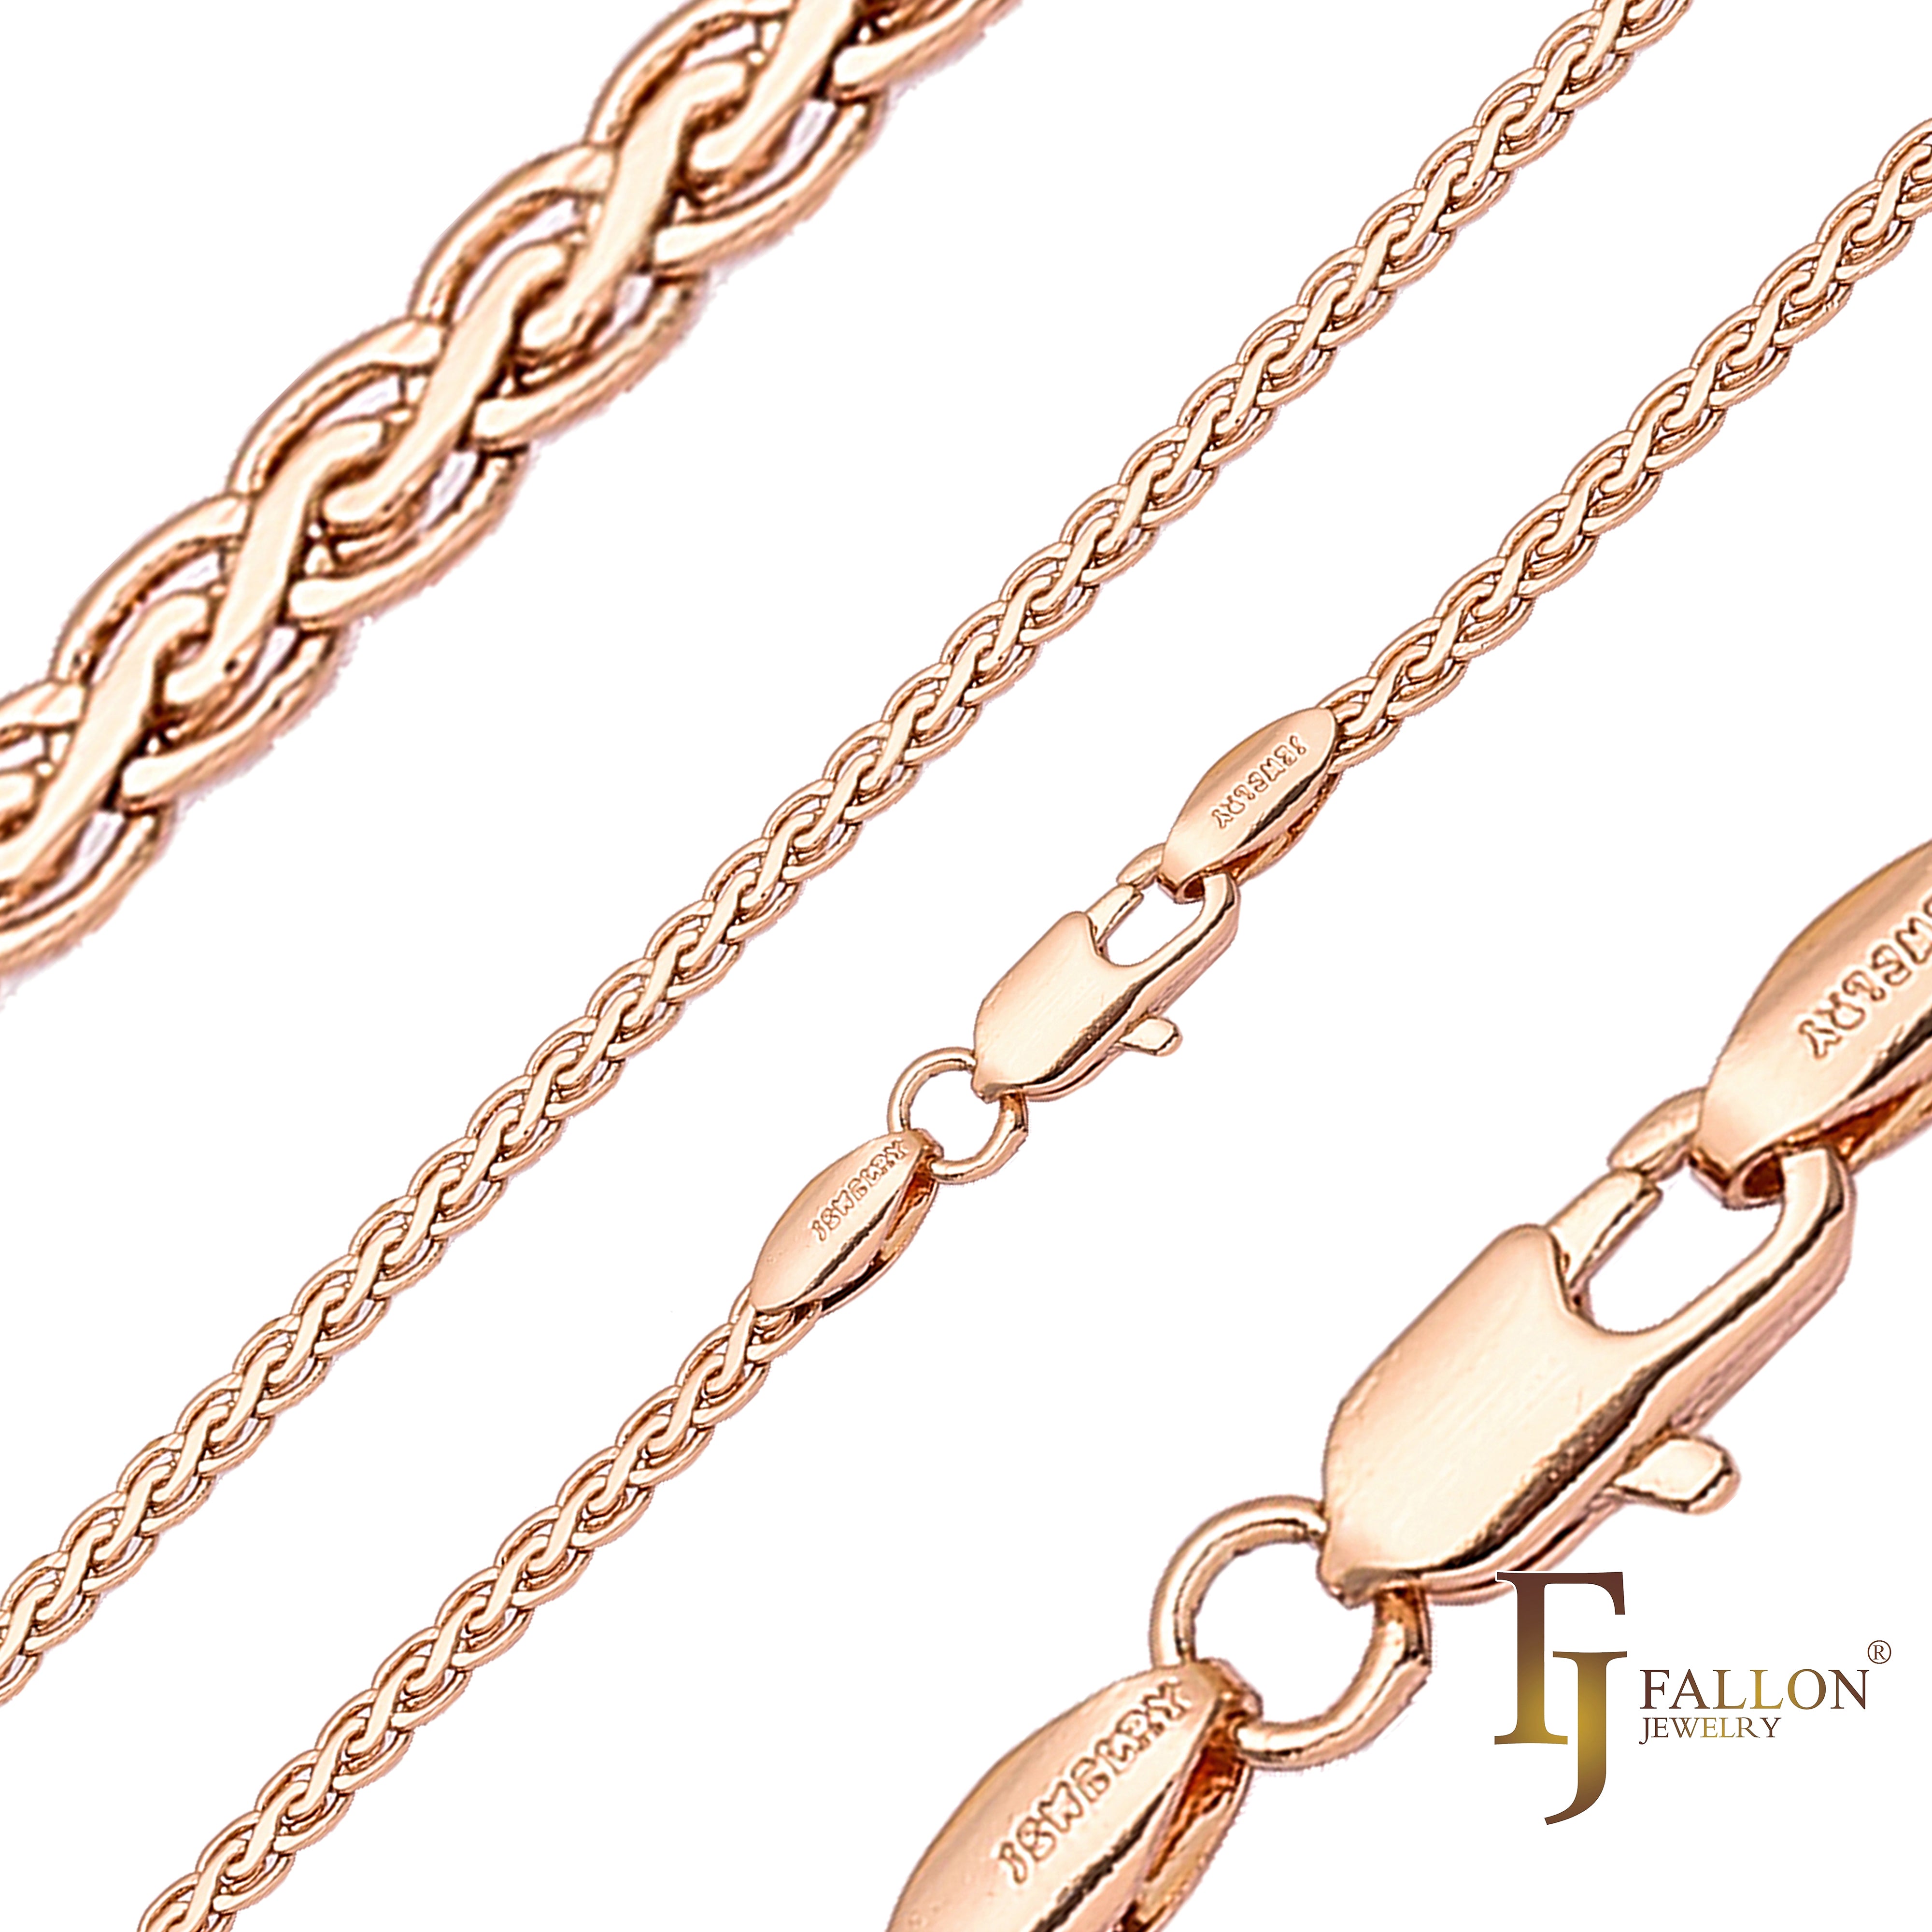 Spiga wheat glossy chains plated in White Gold, 14K Gold, Rose Gold, two tone